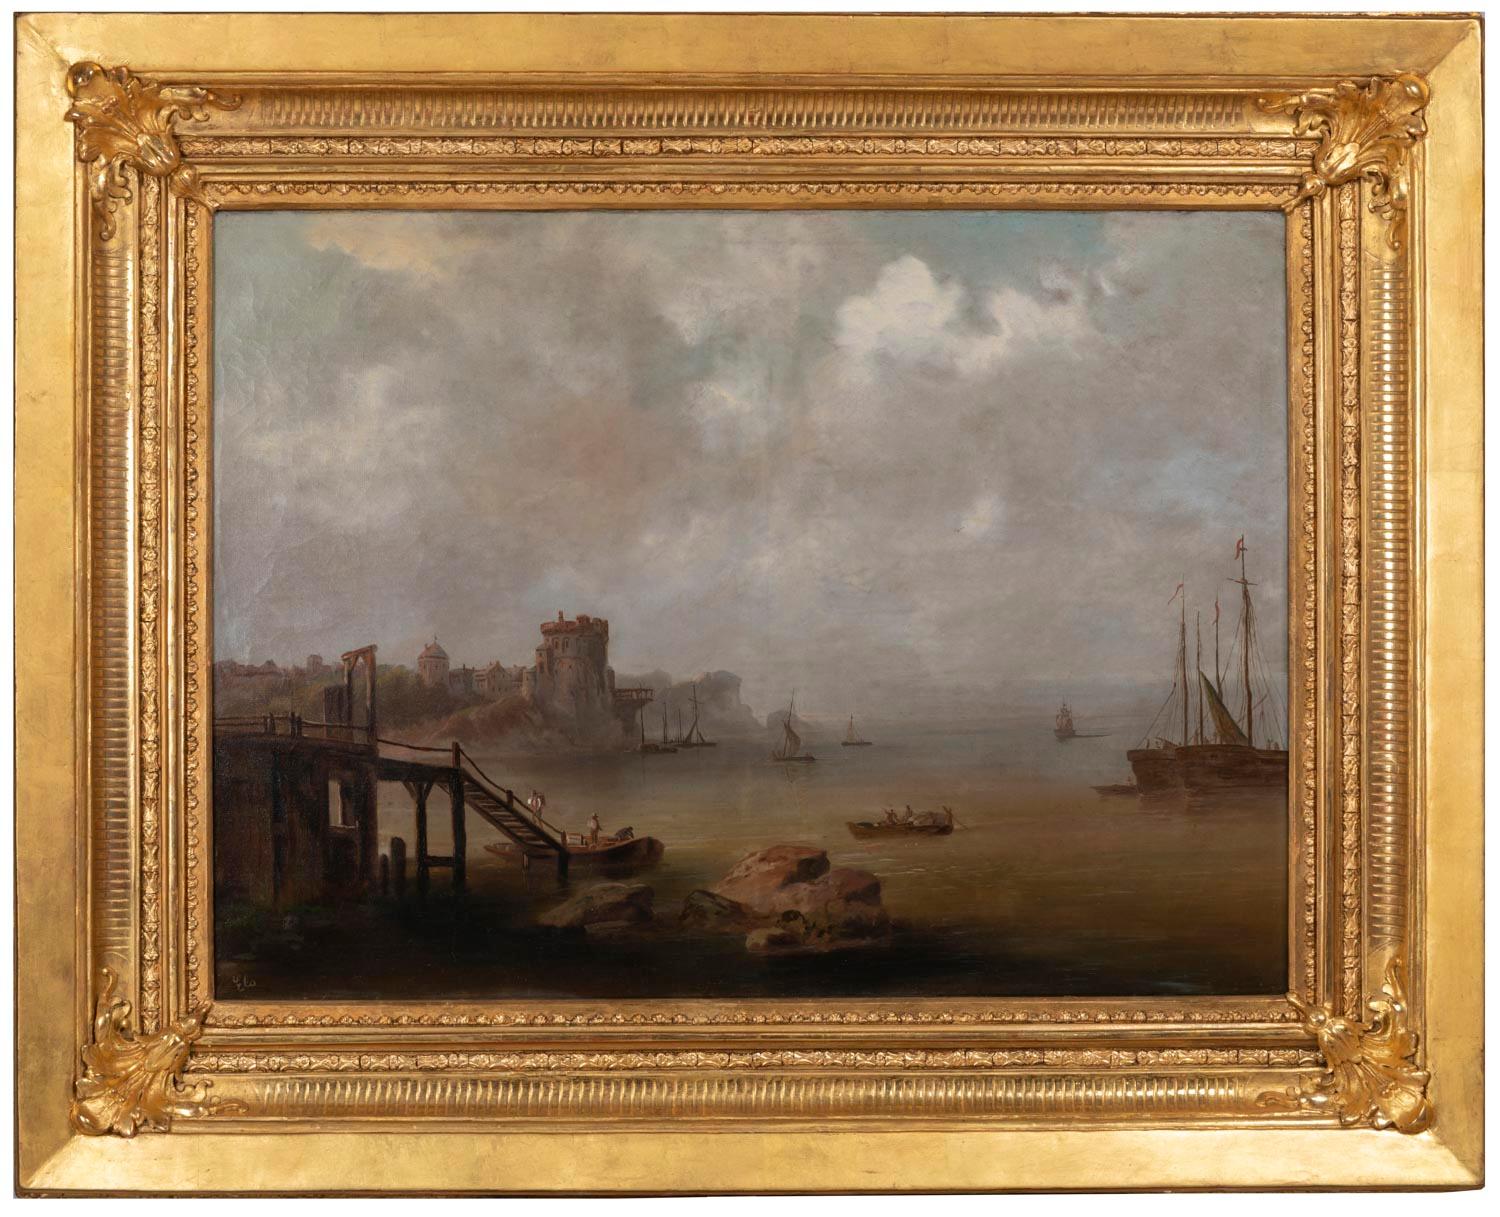 Pair of large Dutch naval paintings from the second half of the 19th century.

Dimensions: 
Length 133.5 cm, width 106 cm with frame
Length 100 cm, width 73.5 cm without frame.

Signature: Monogrammed ELS

Frame: 19th century.
 